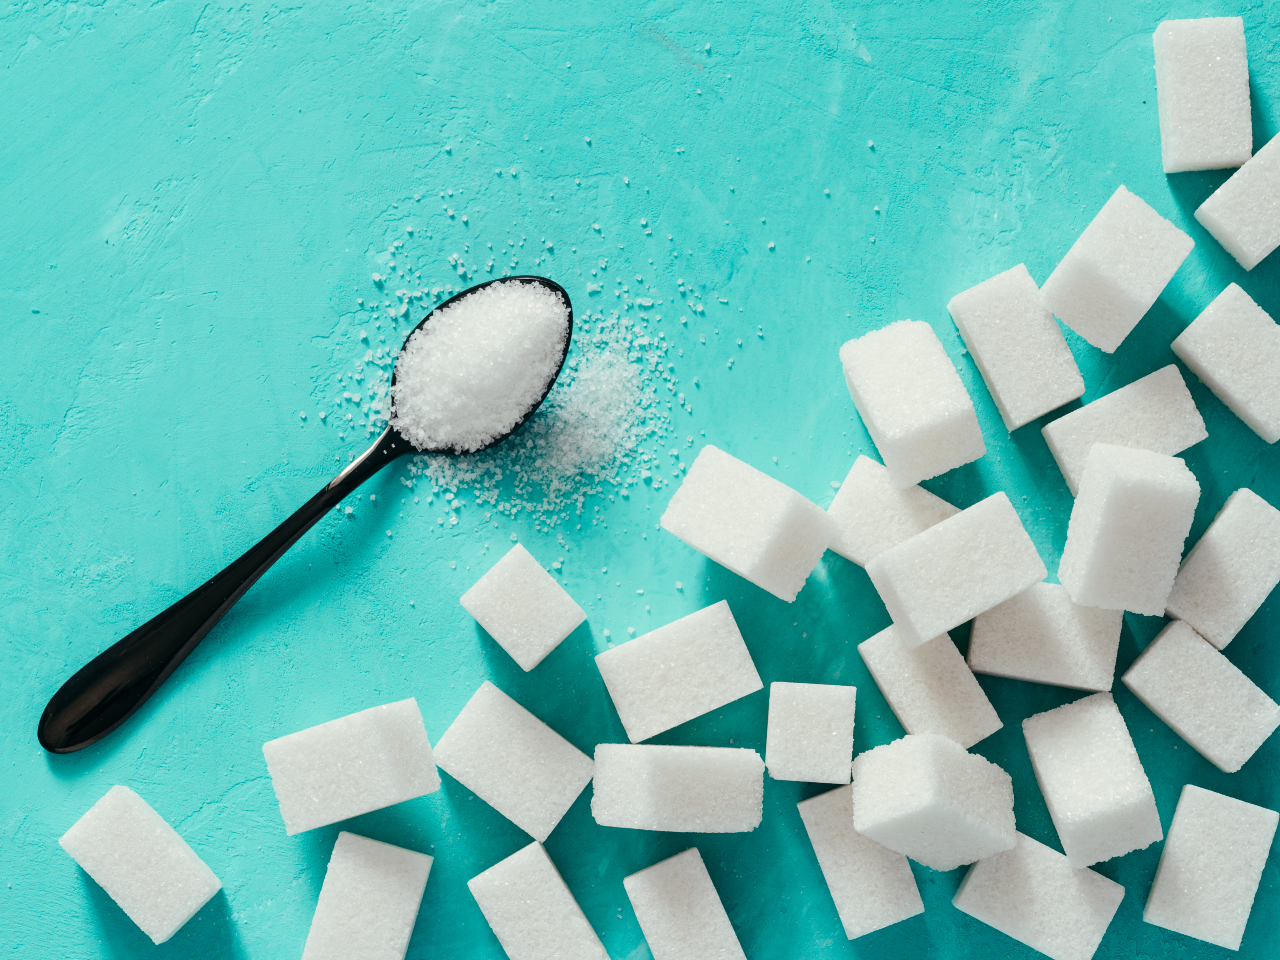 Long-term studies are assessing whether alternatives to sugar are safe and effective.